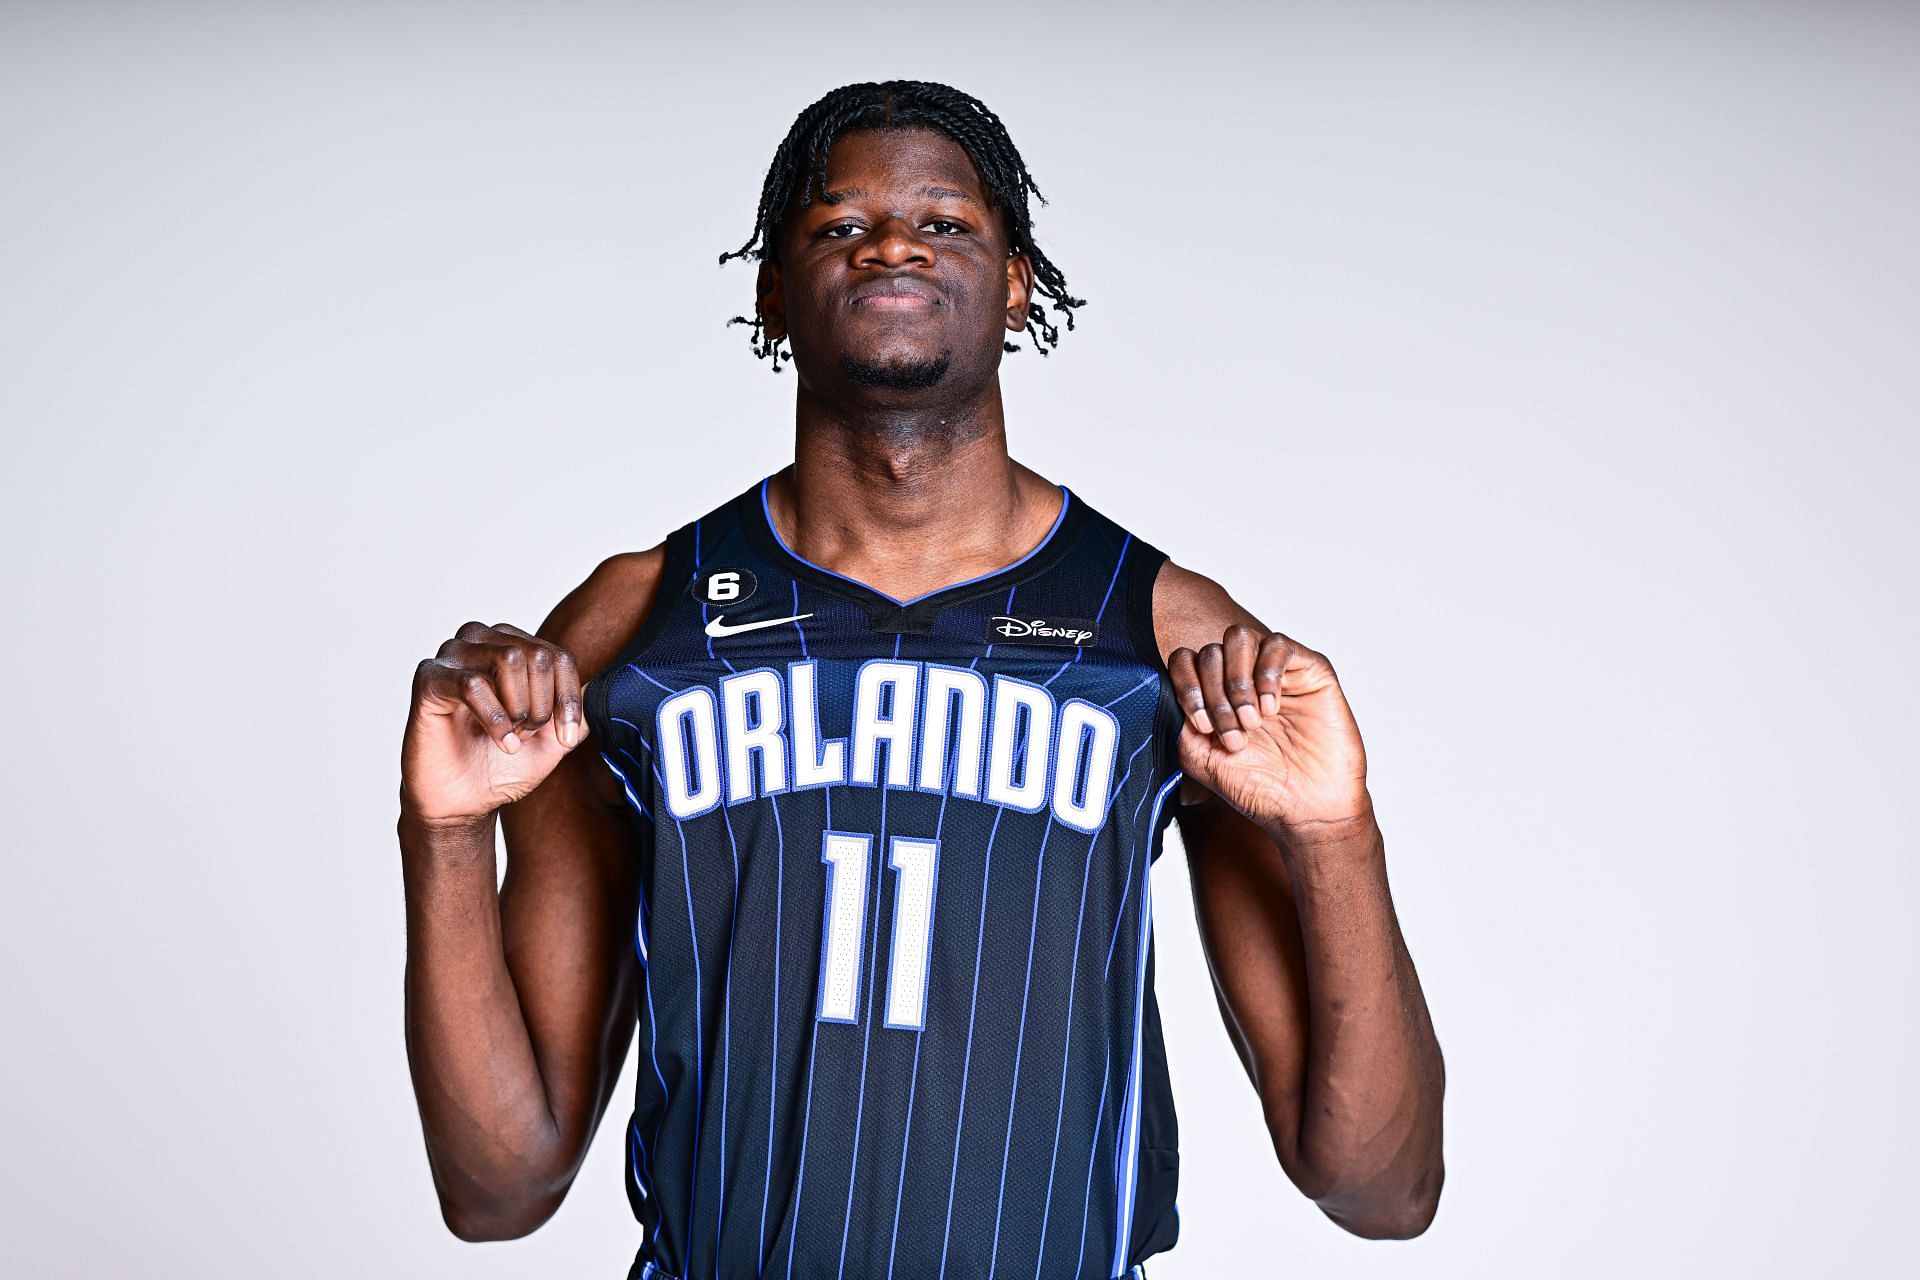 Lakers acquire Mo Bamba in trade with Magic